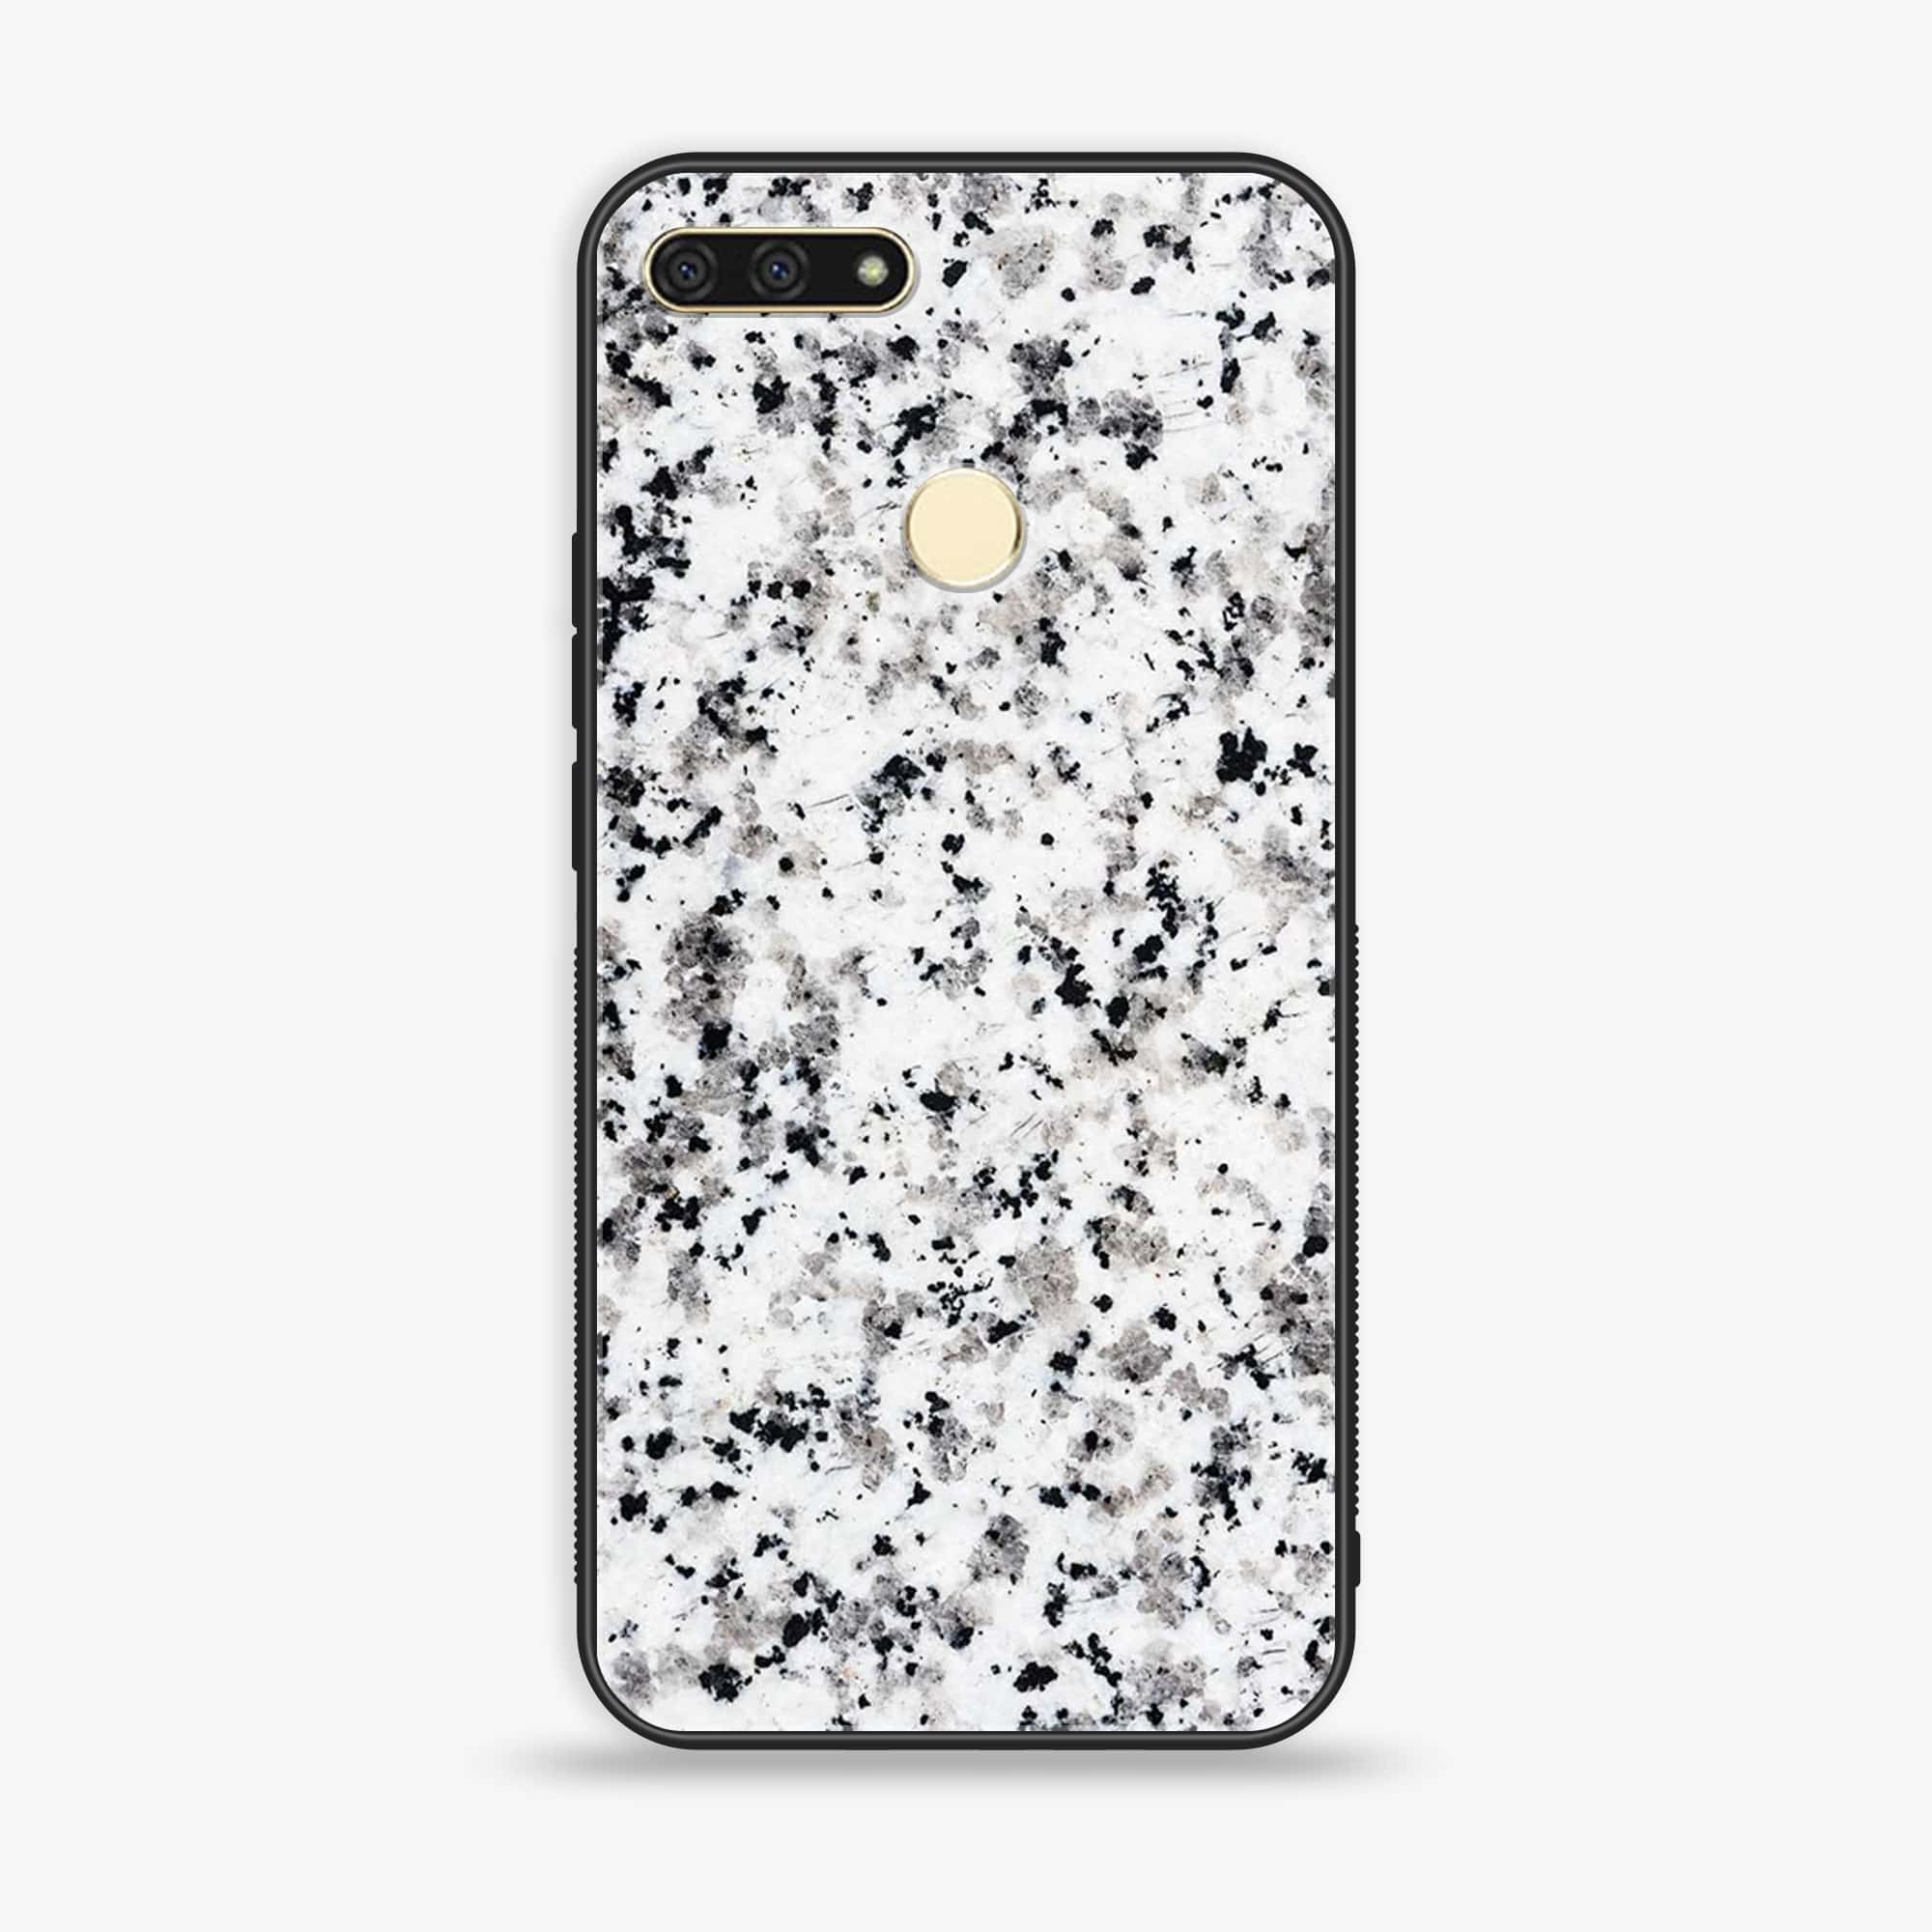 Huawei Y6 2018/Honor Play 7A - White Marble Series - Premium Printed Glass soft Bumper shock Proof Case